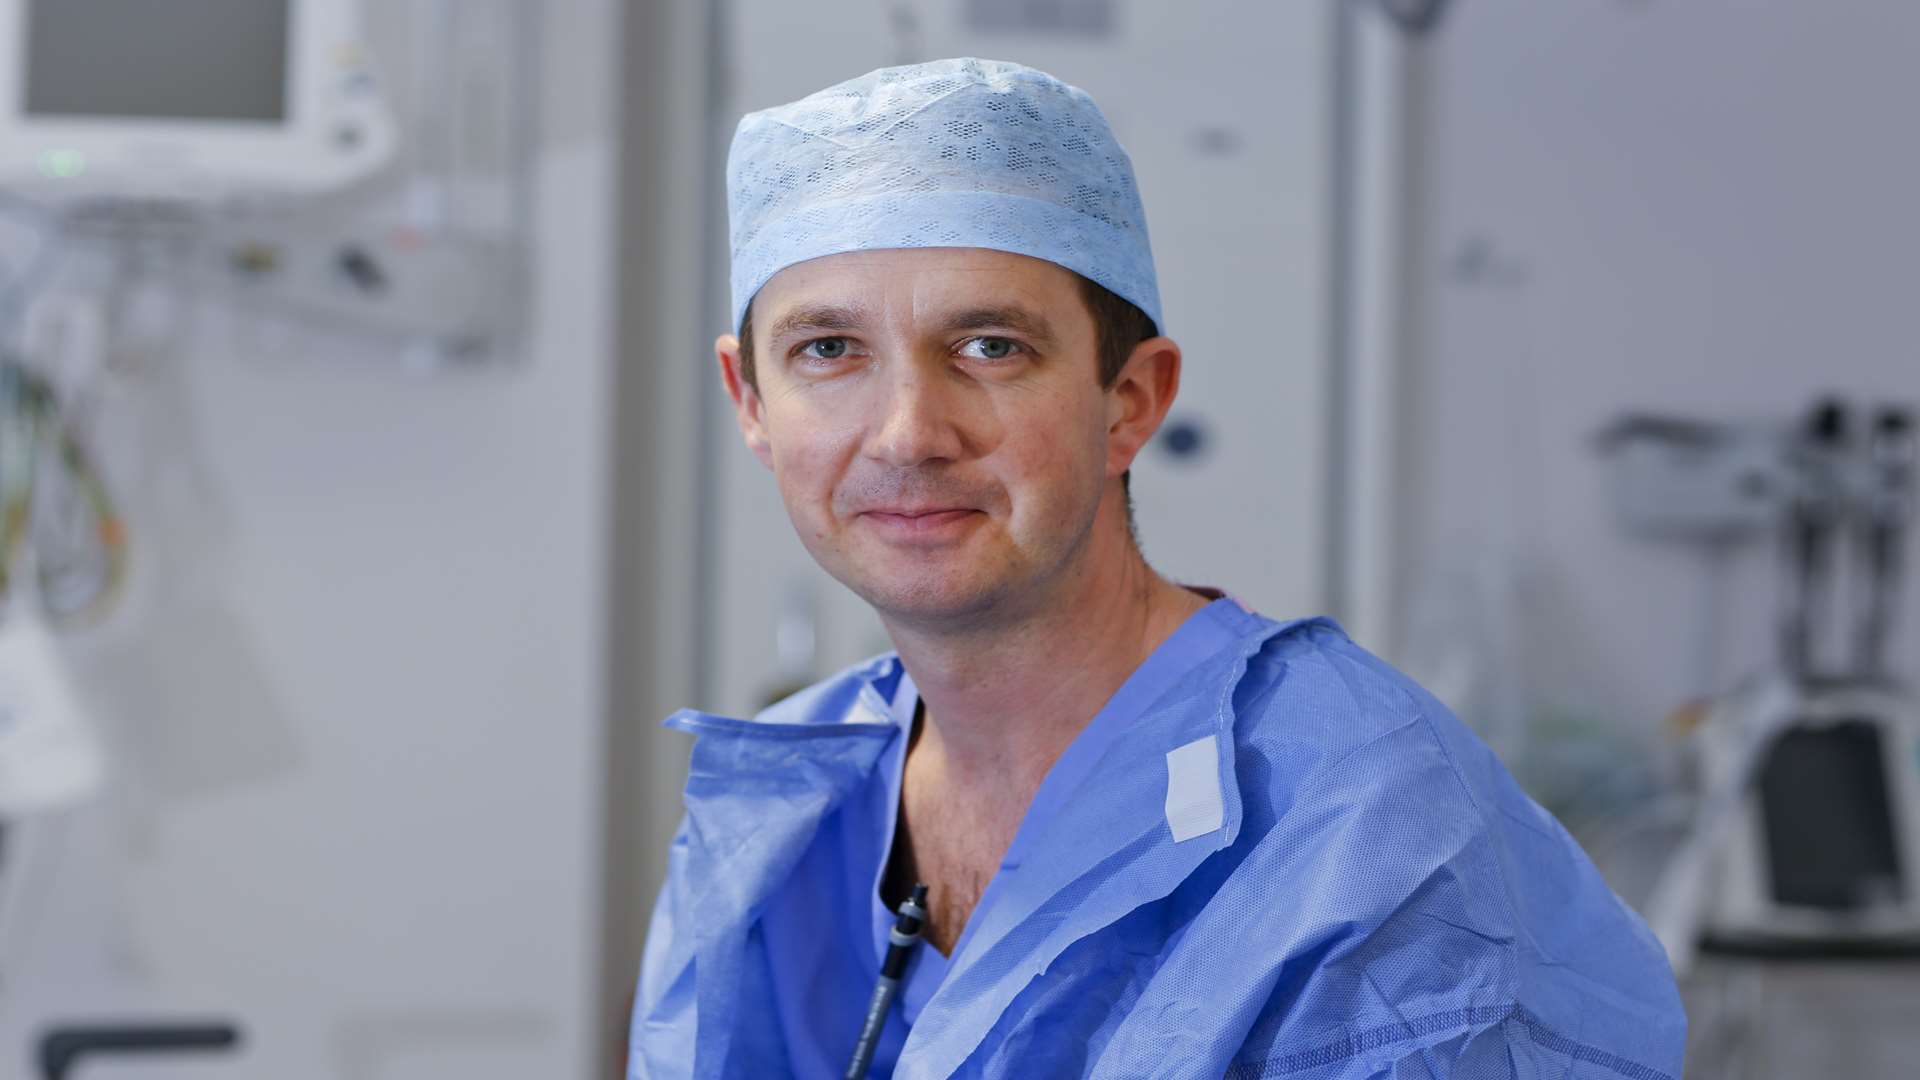 Dr Andy Taylor is flying out to Sierra Leone to help Ebola victims